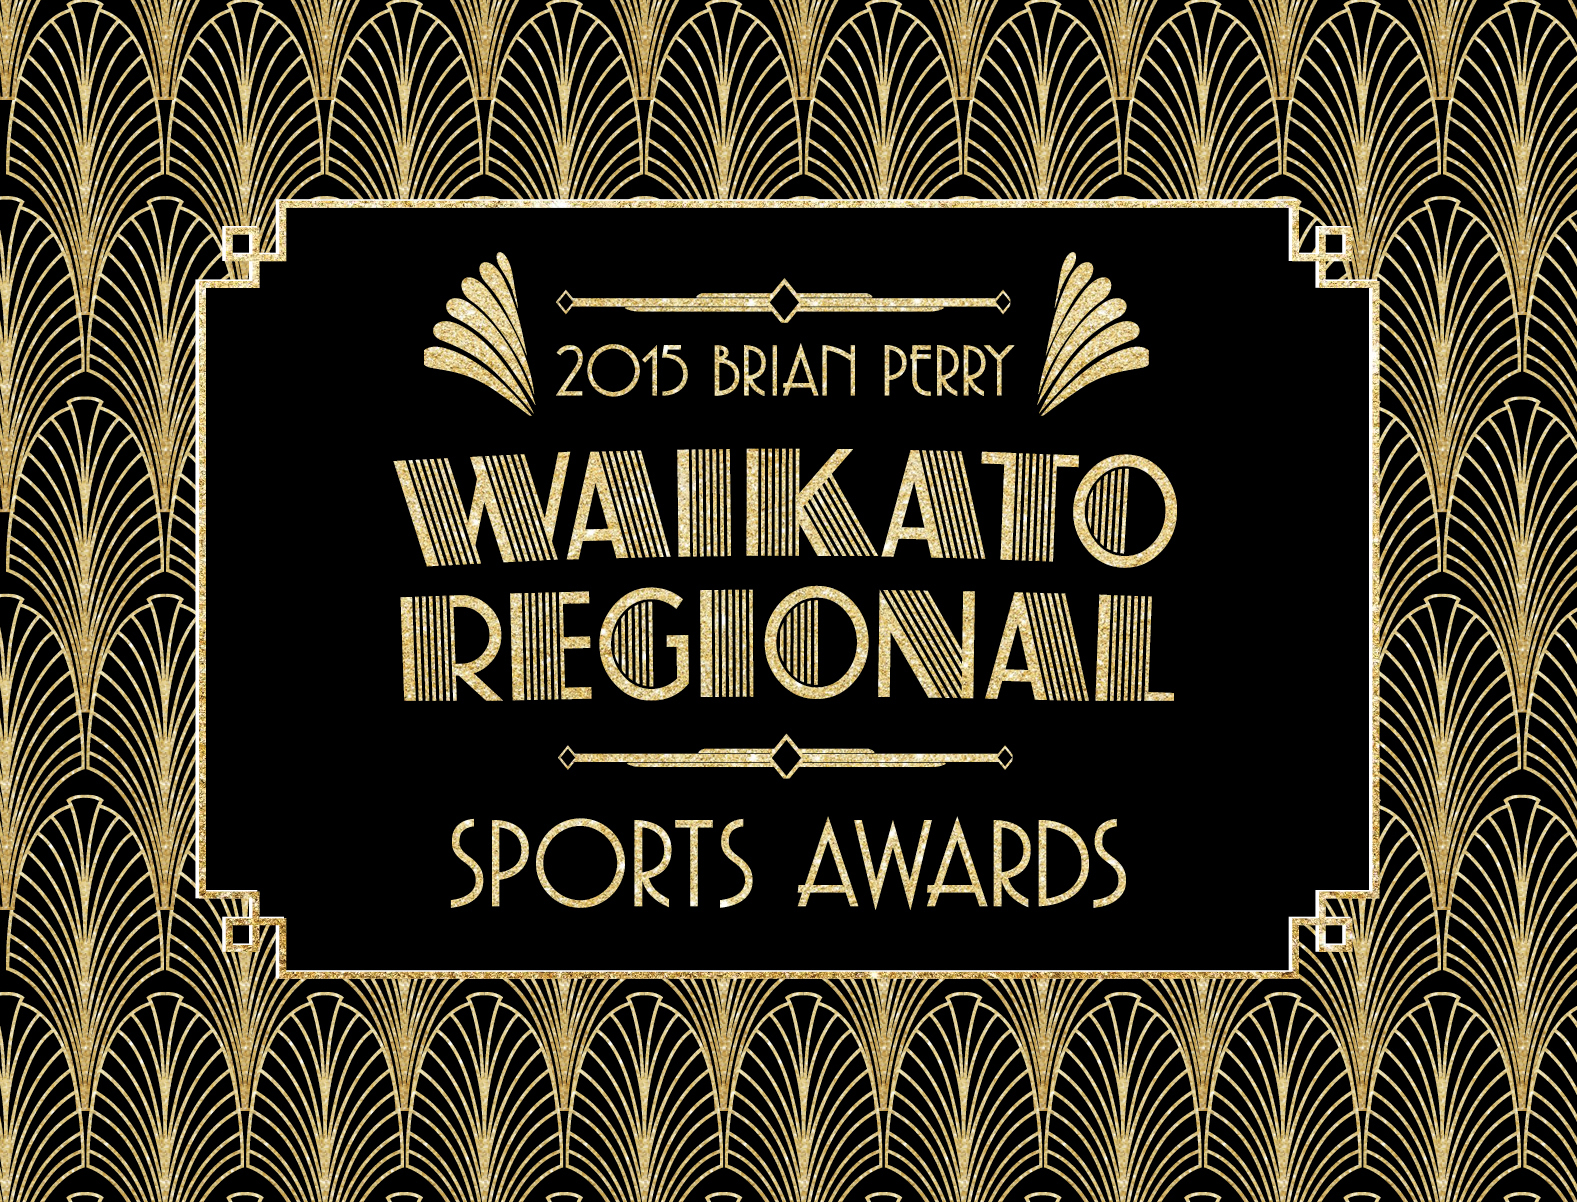 Finalists announced for 2015 Brian Perry Waikato Regional Sports Awards